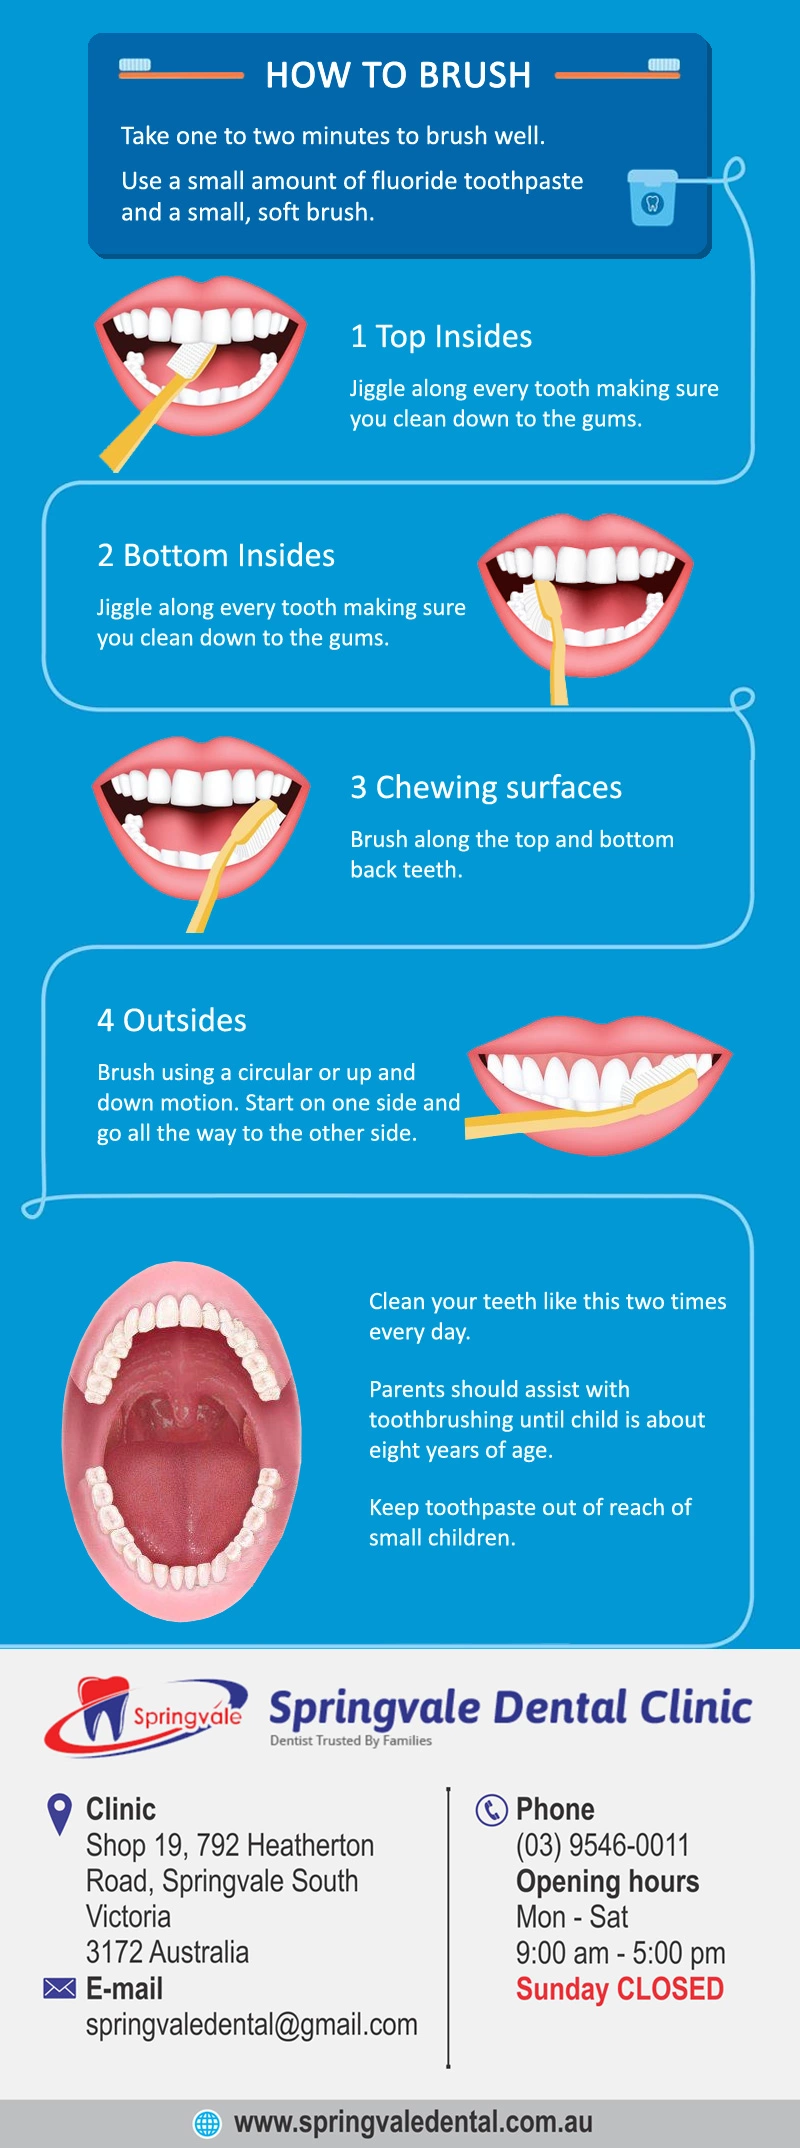 Deep Cleaning - Brushwell Dental & Implants